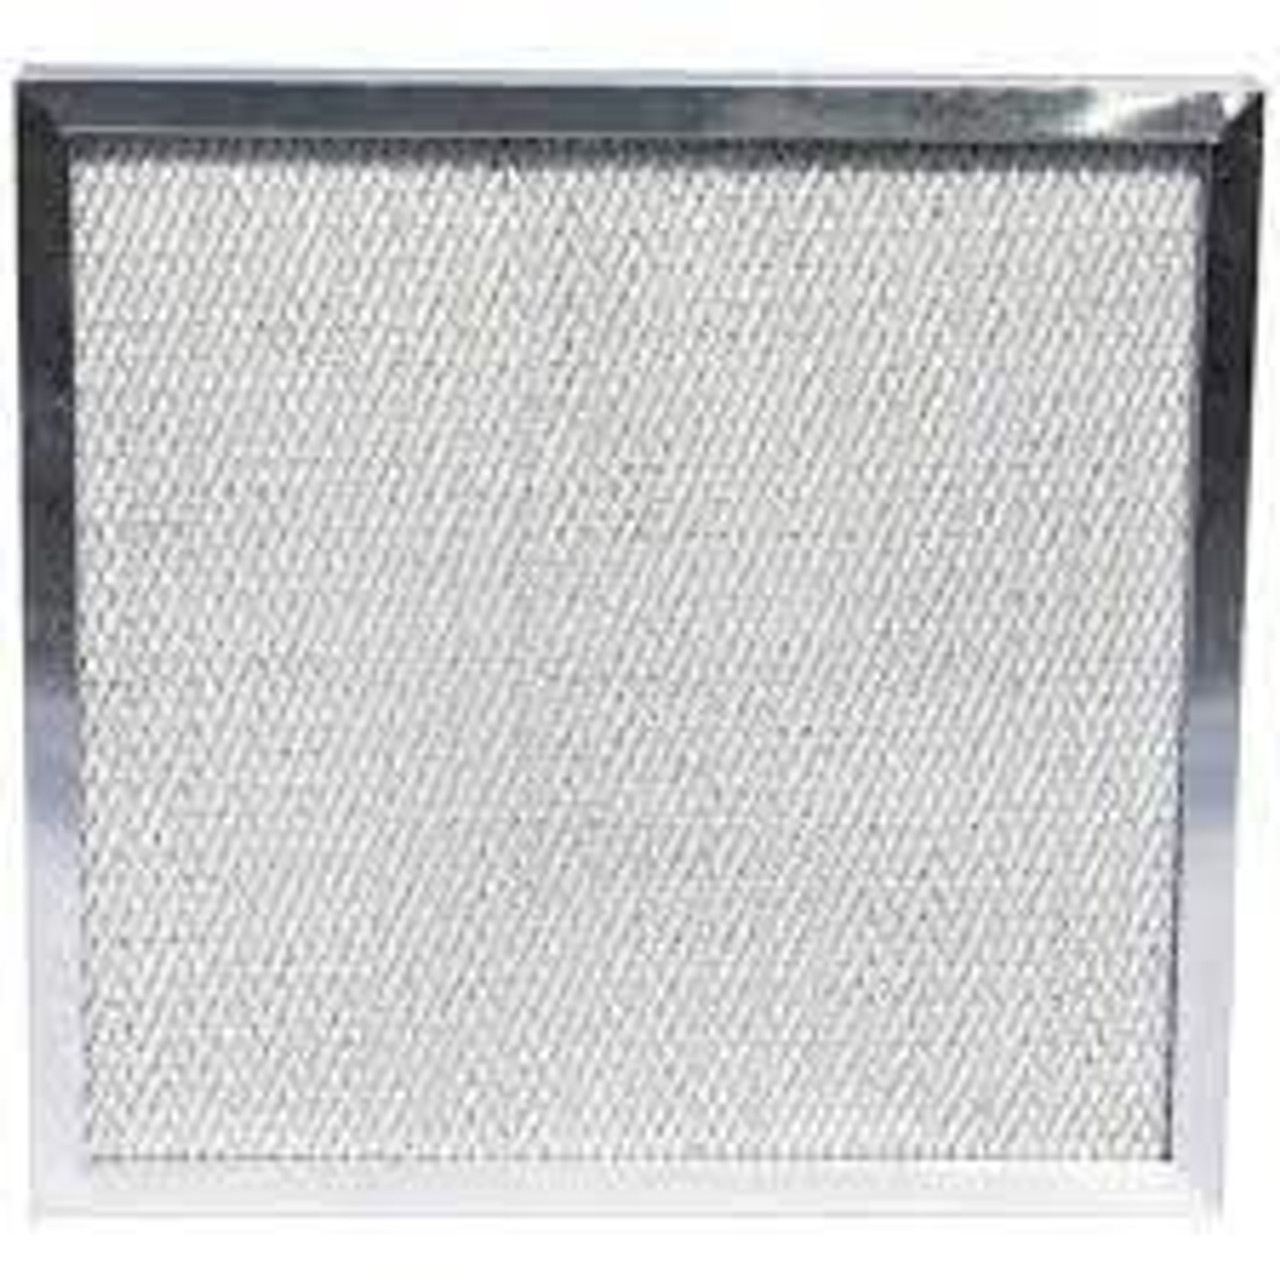 Dri Eaz 4 PRO Four Stage Air Filter for LGR7000 & DrizAir 1200 24/Case